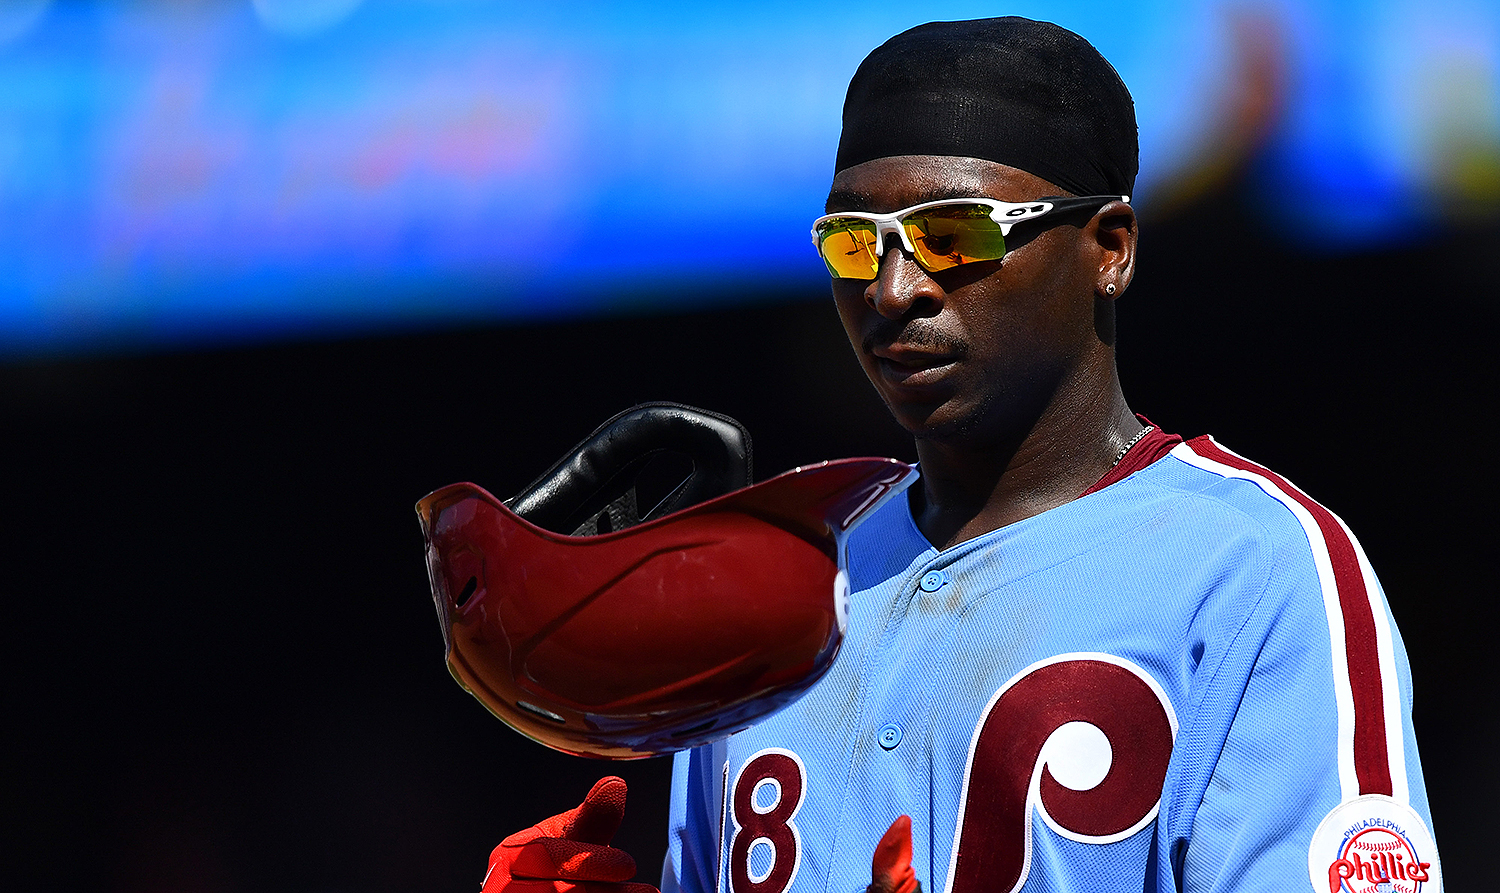 Phillies have a tough decision to make with Didi Gregorius